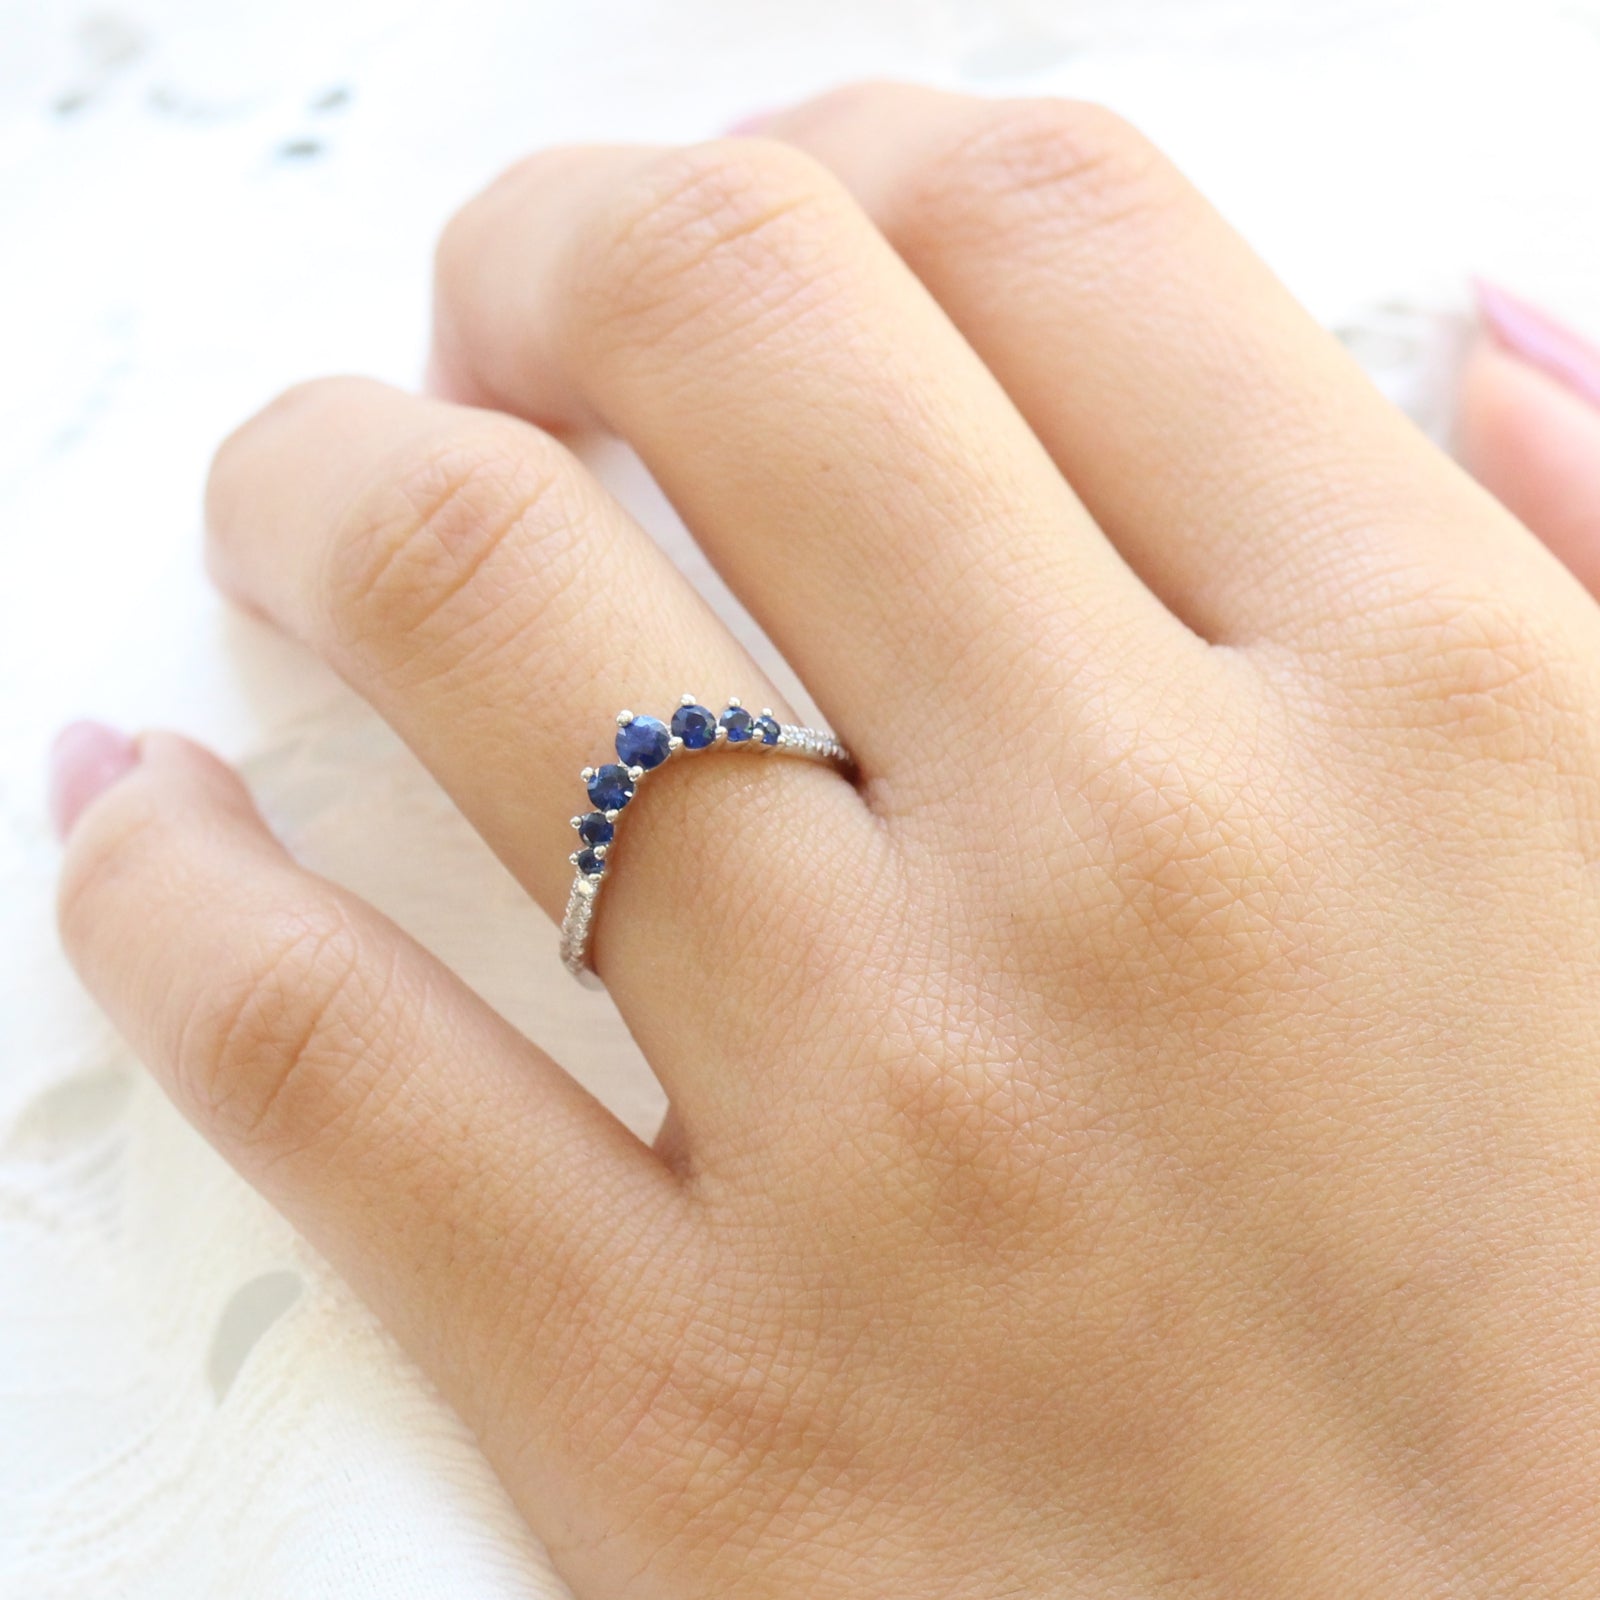 blue sapphire wedding ring in white gold curved diamond wedding band by la more design jewelry